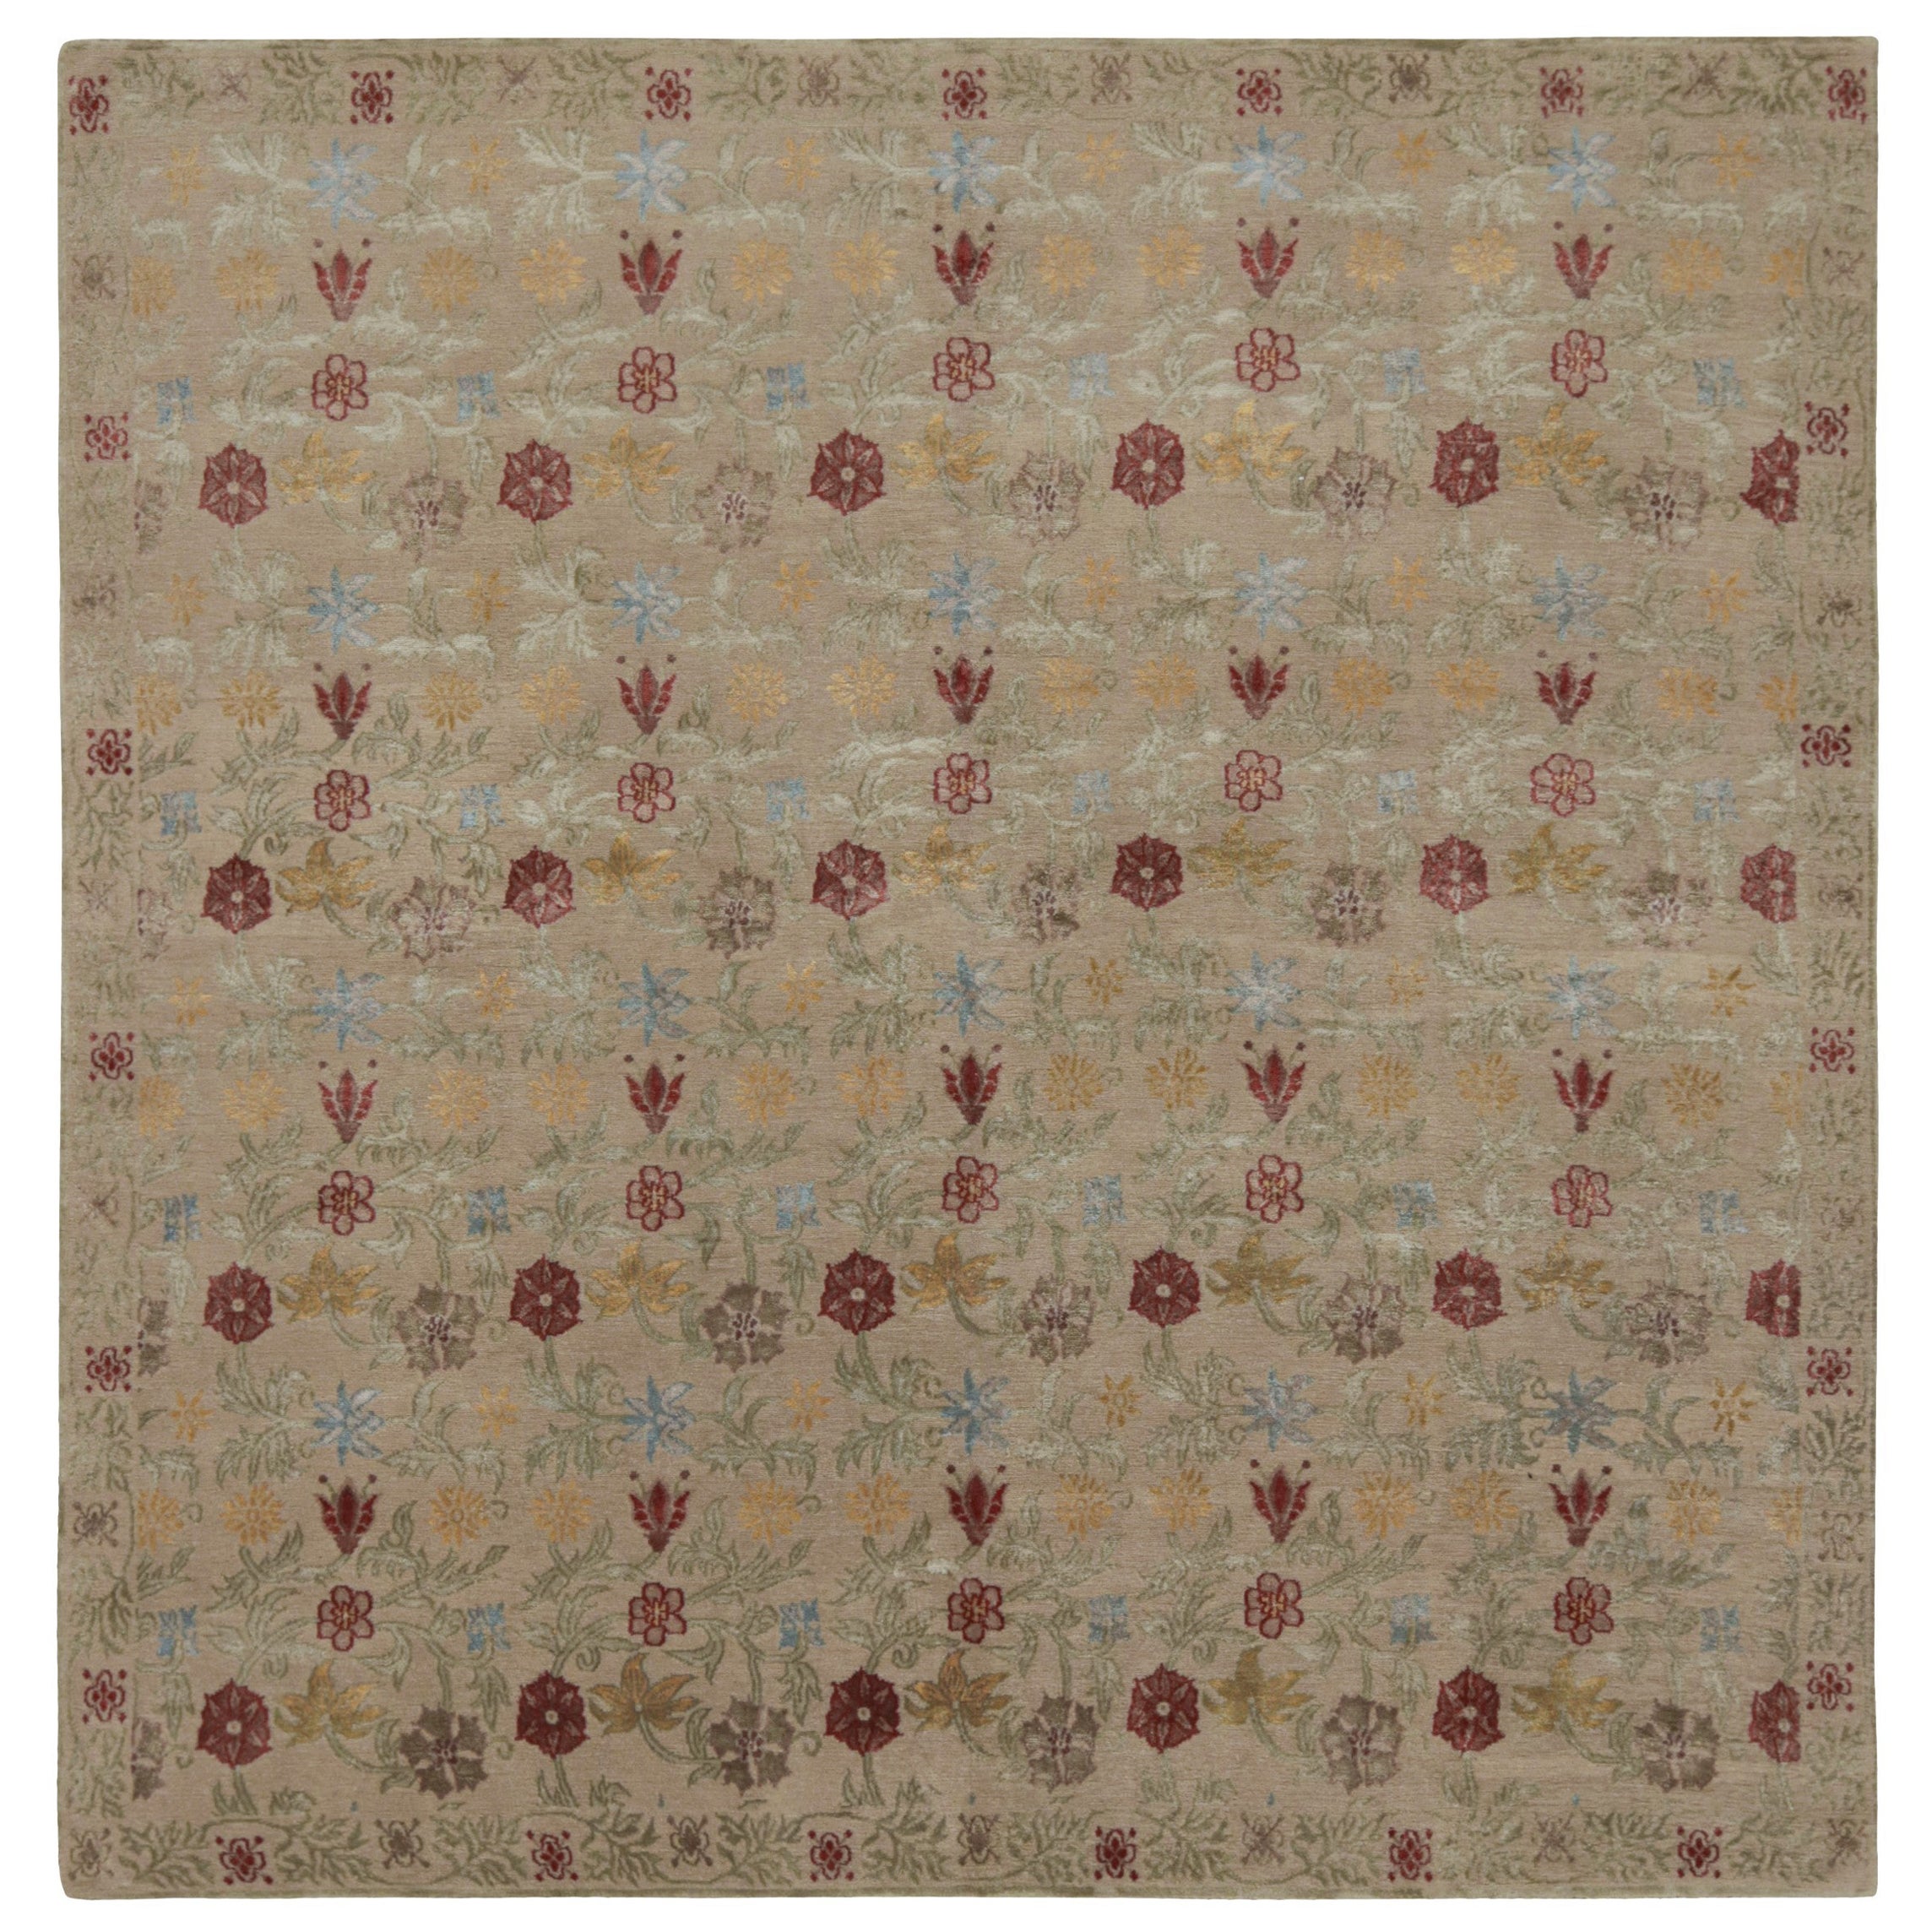 Rug & Kilim’s “Bilbao” Spanish Style Rug in Beige with Colorful Floral Patterns For Sale